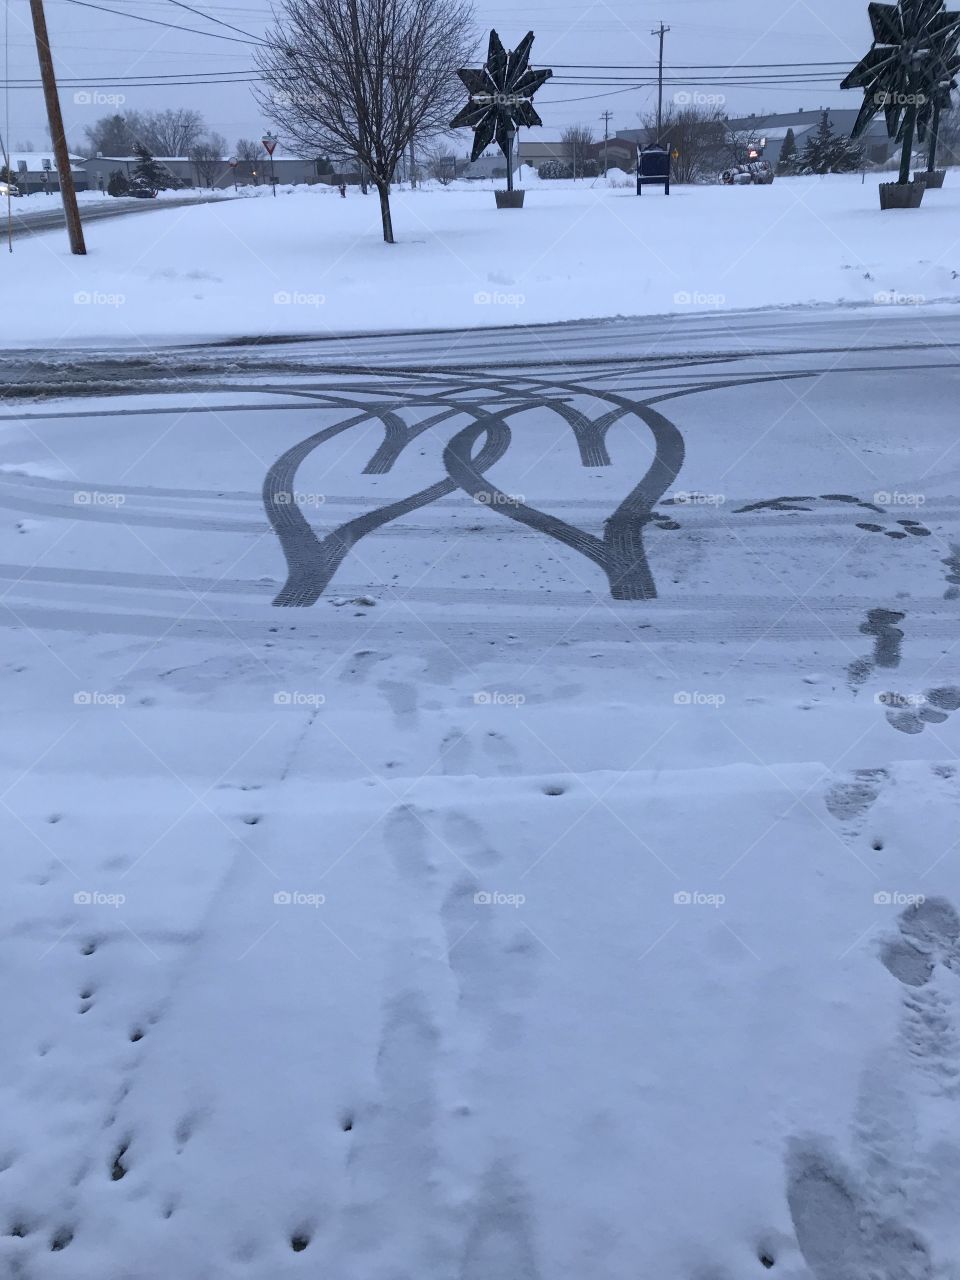 Hearts in the driveway